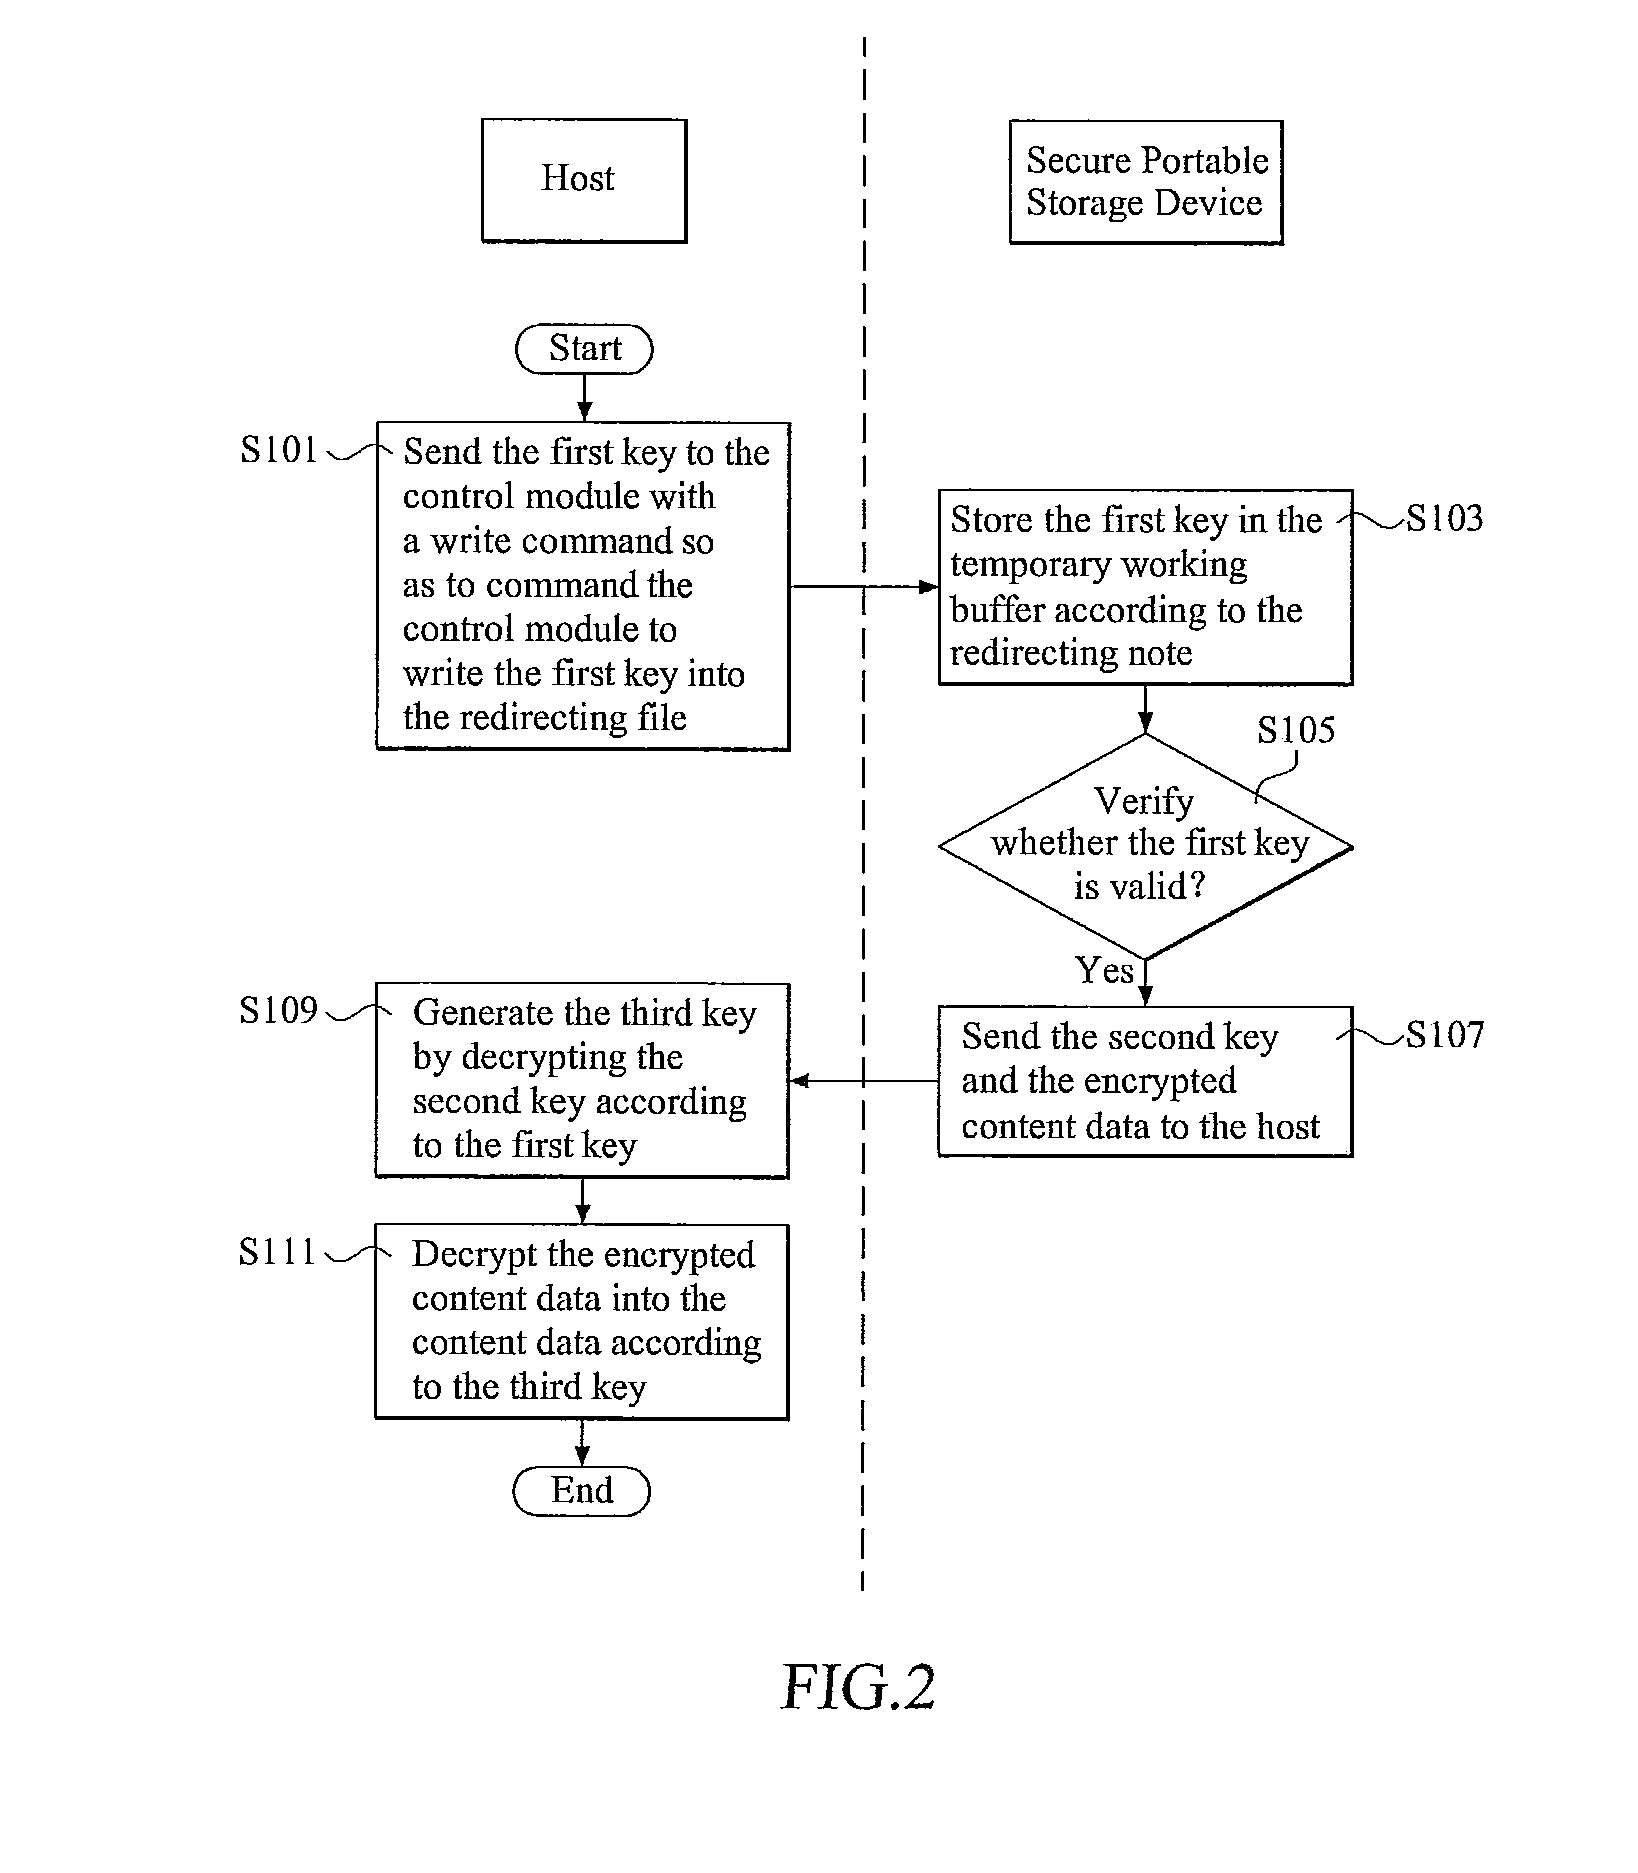 Access control for secure portable storage device